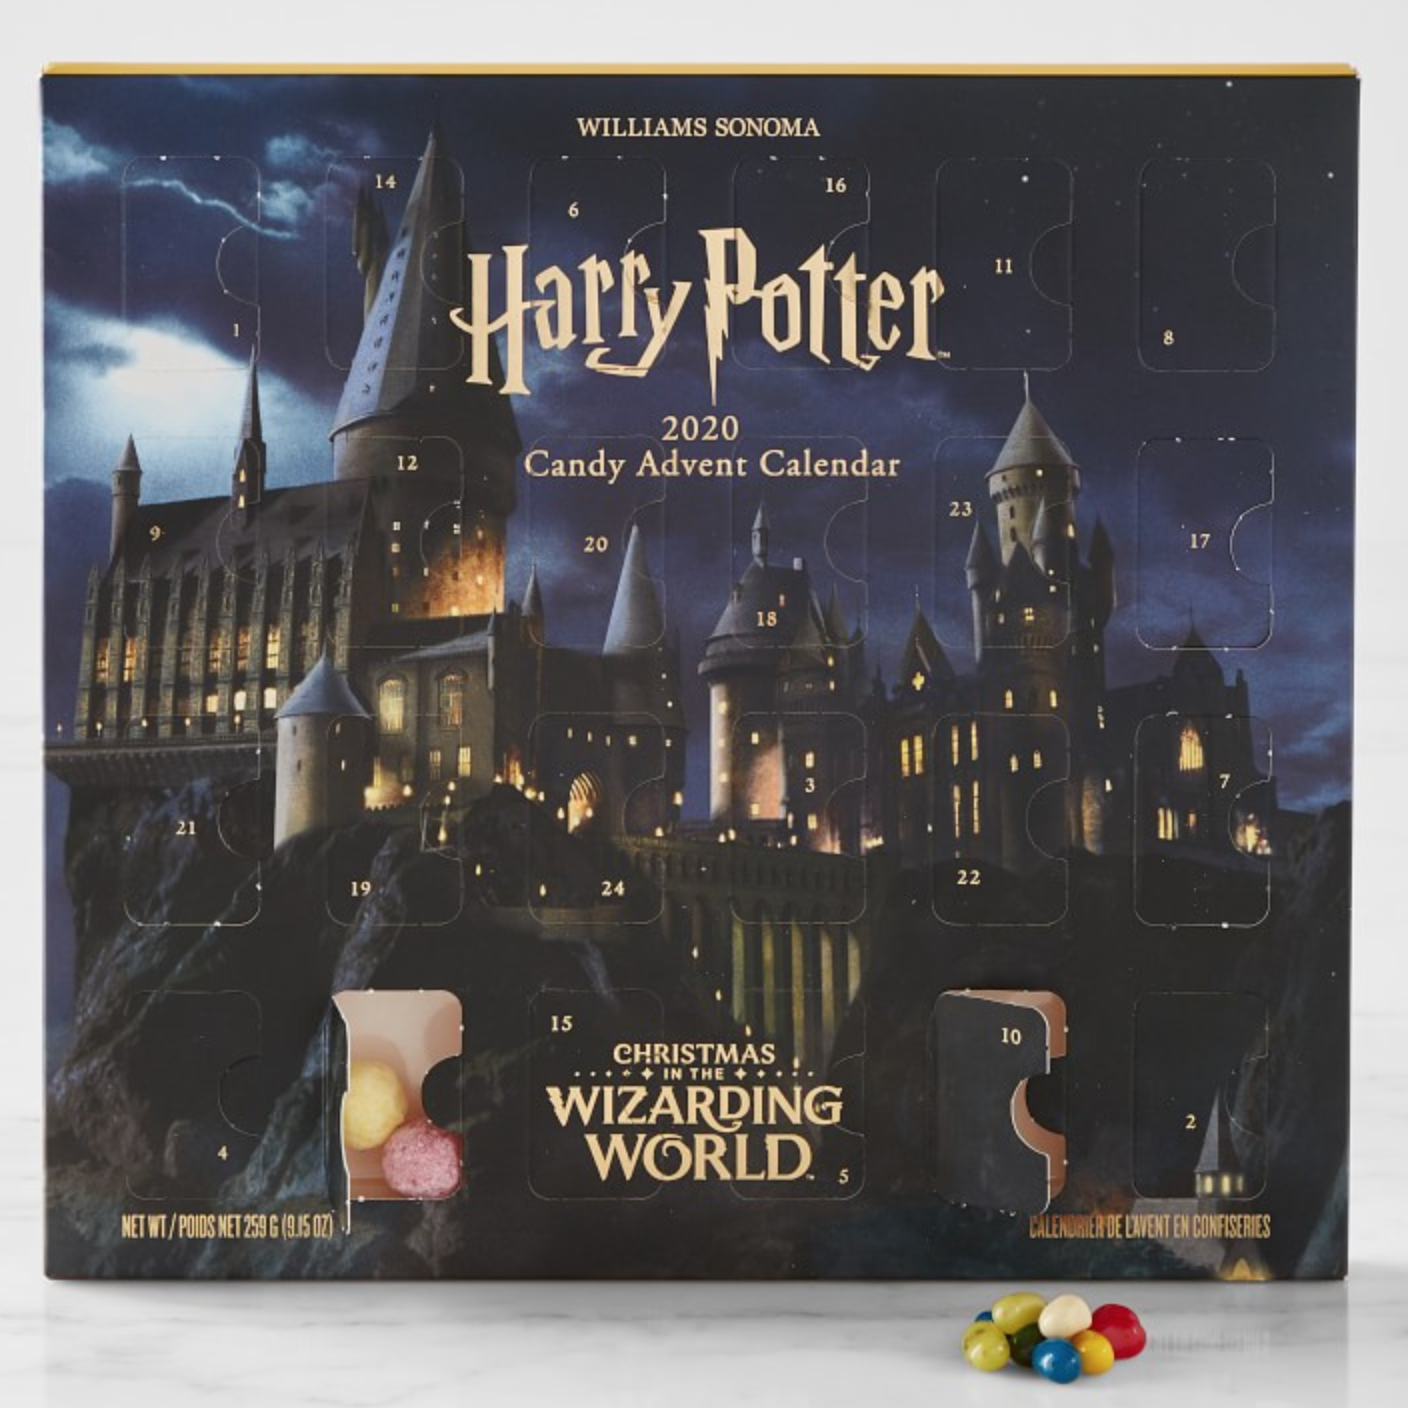 Williams Sonoma Harry Potter Advent Calendar – Available Now!